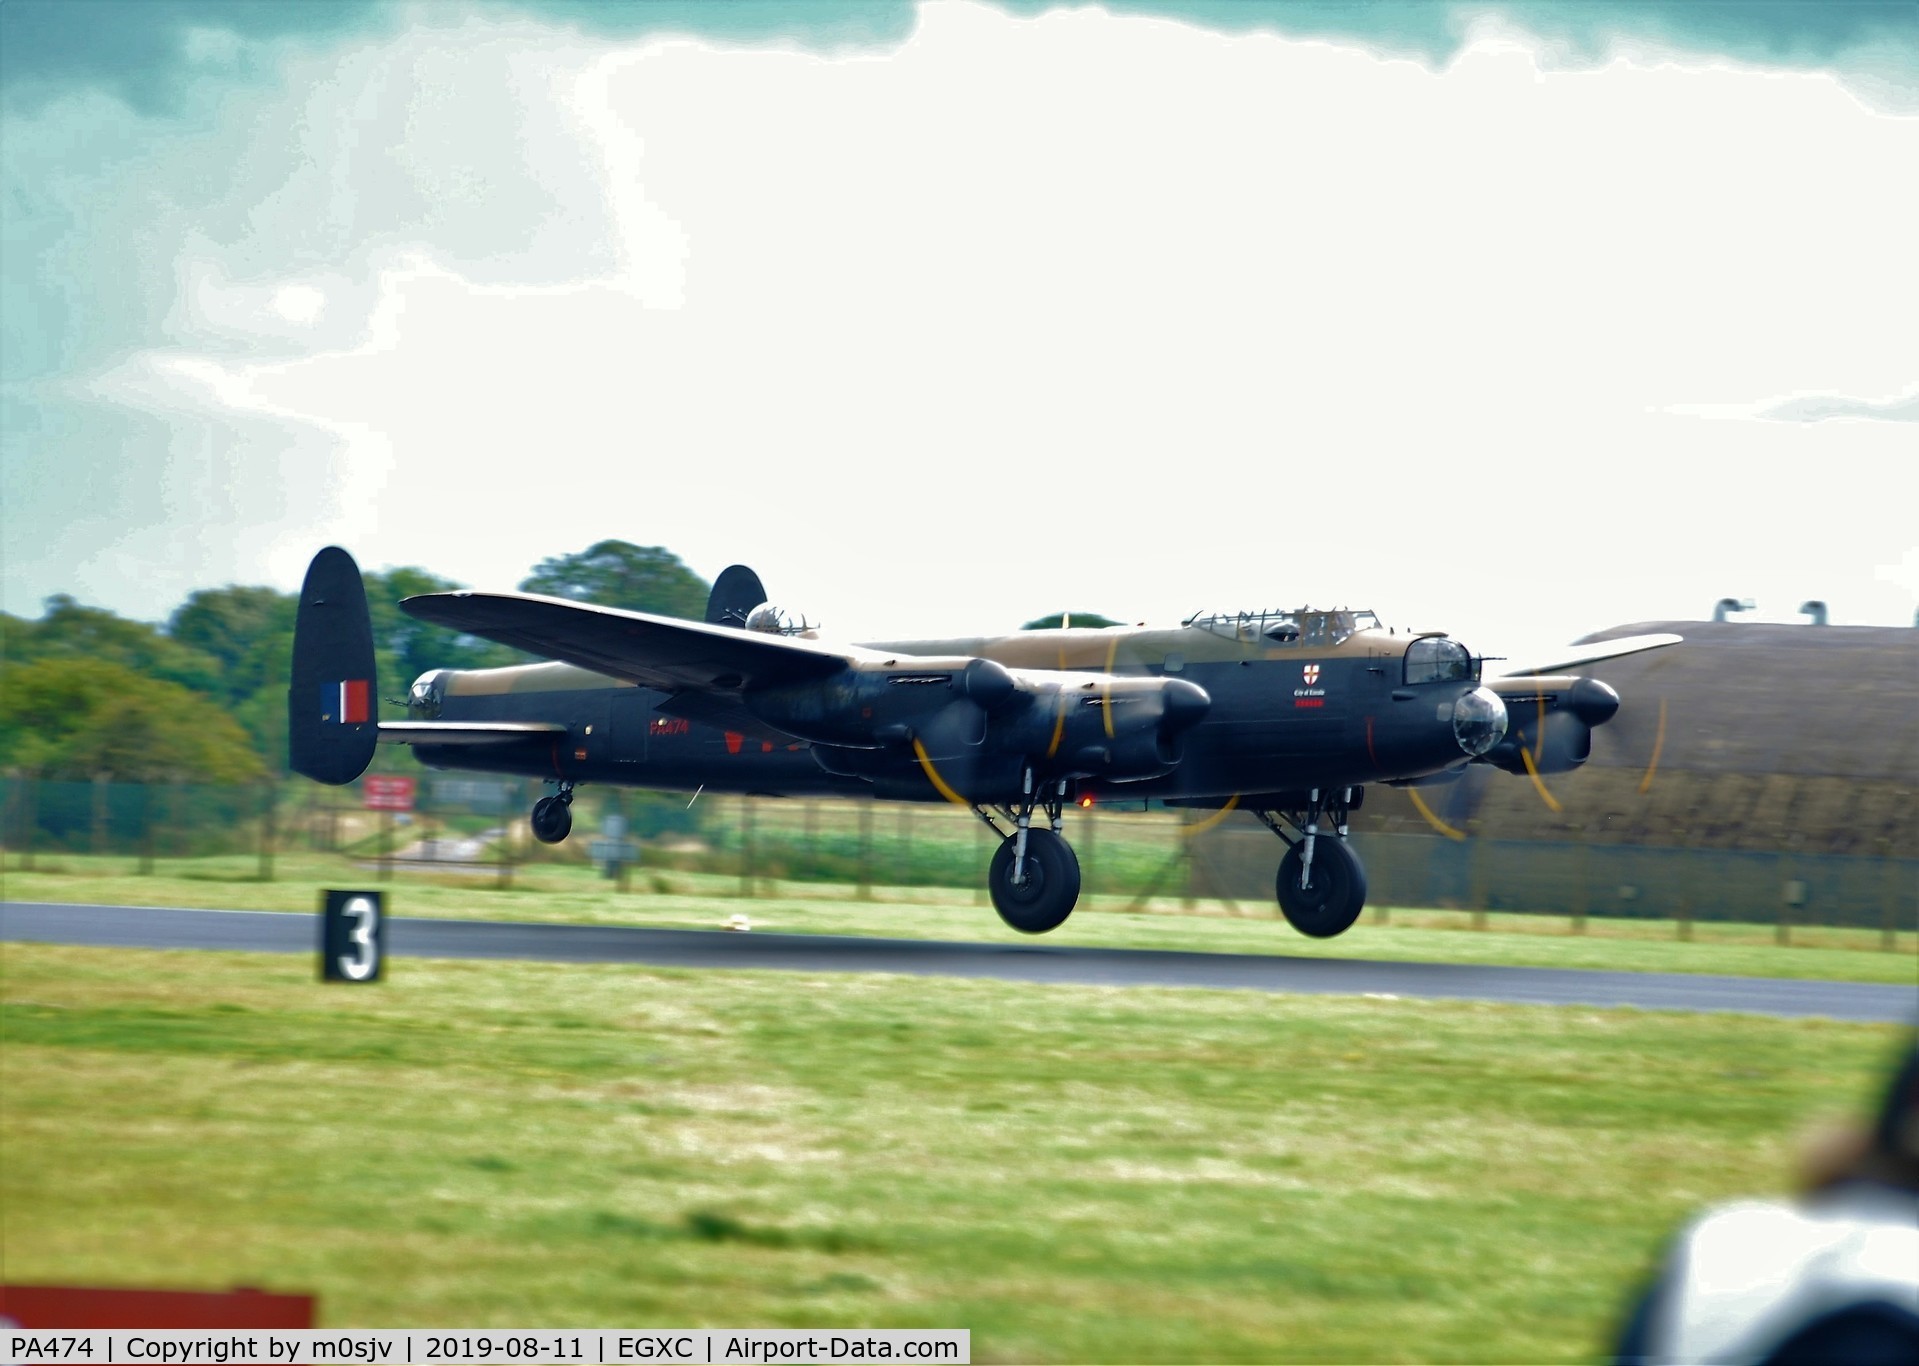 PA474, 1945 Avro 683 Lancaster B1 C/N VACH0052/D2973, Taken From Crash gate 1
Home at Last